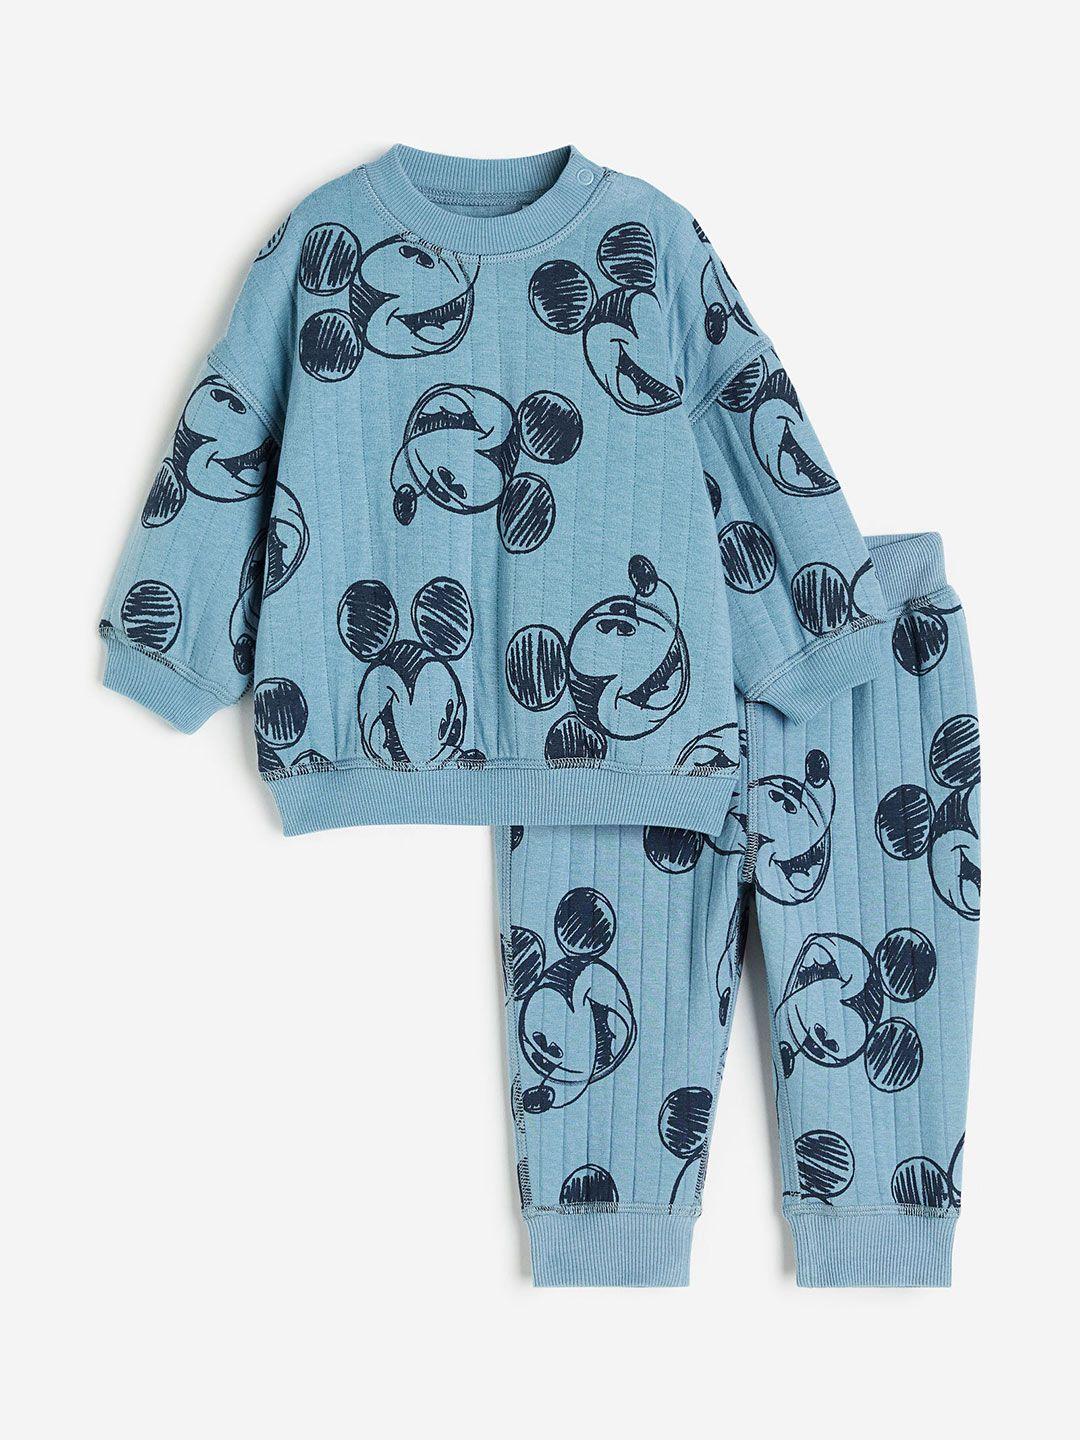 h&m-boys-mickey-mouse-printed-sweatshirt-with-joggers-clothing-set